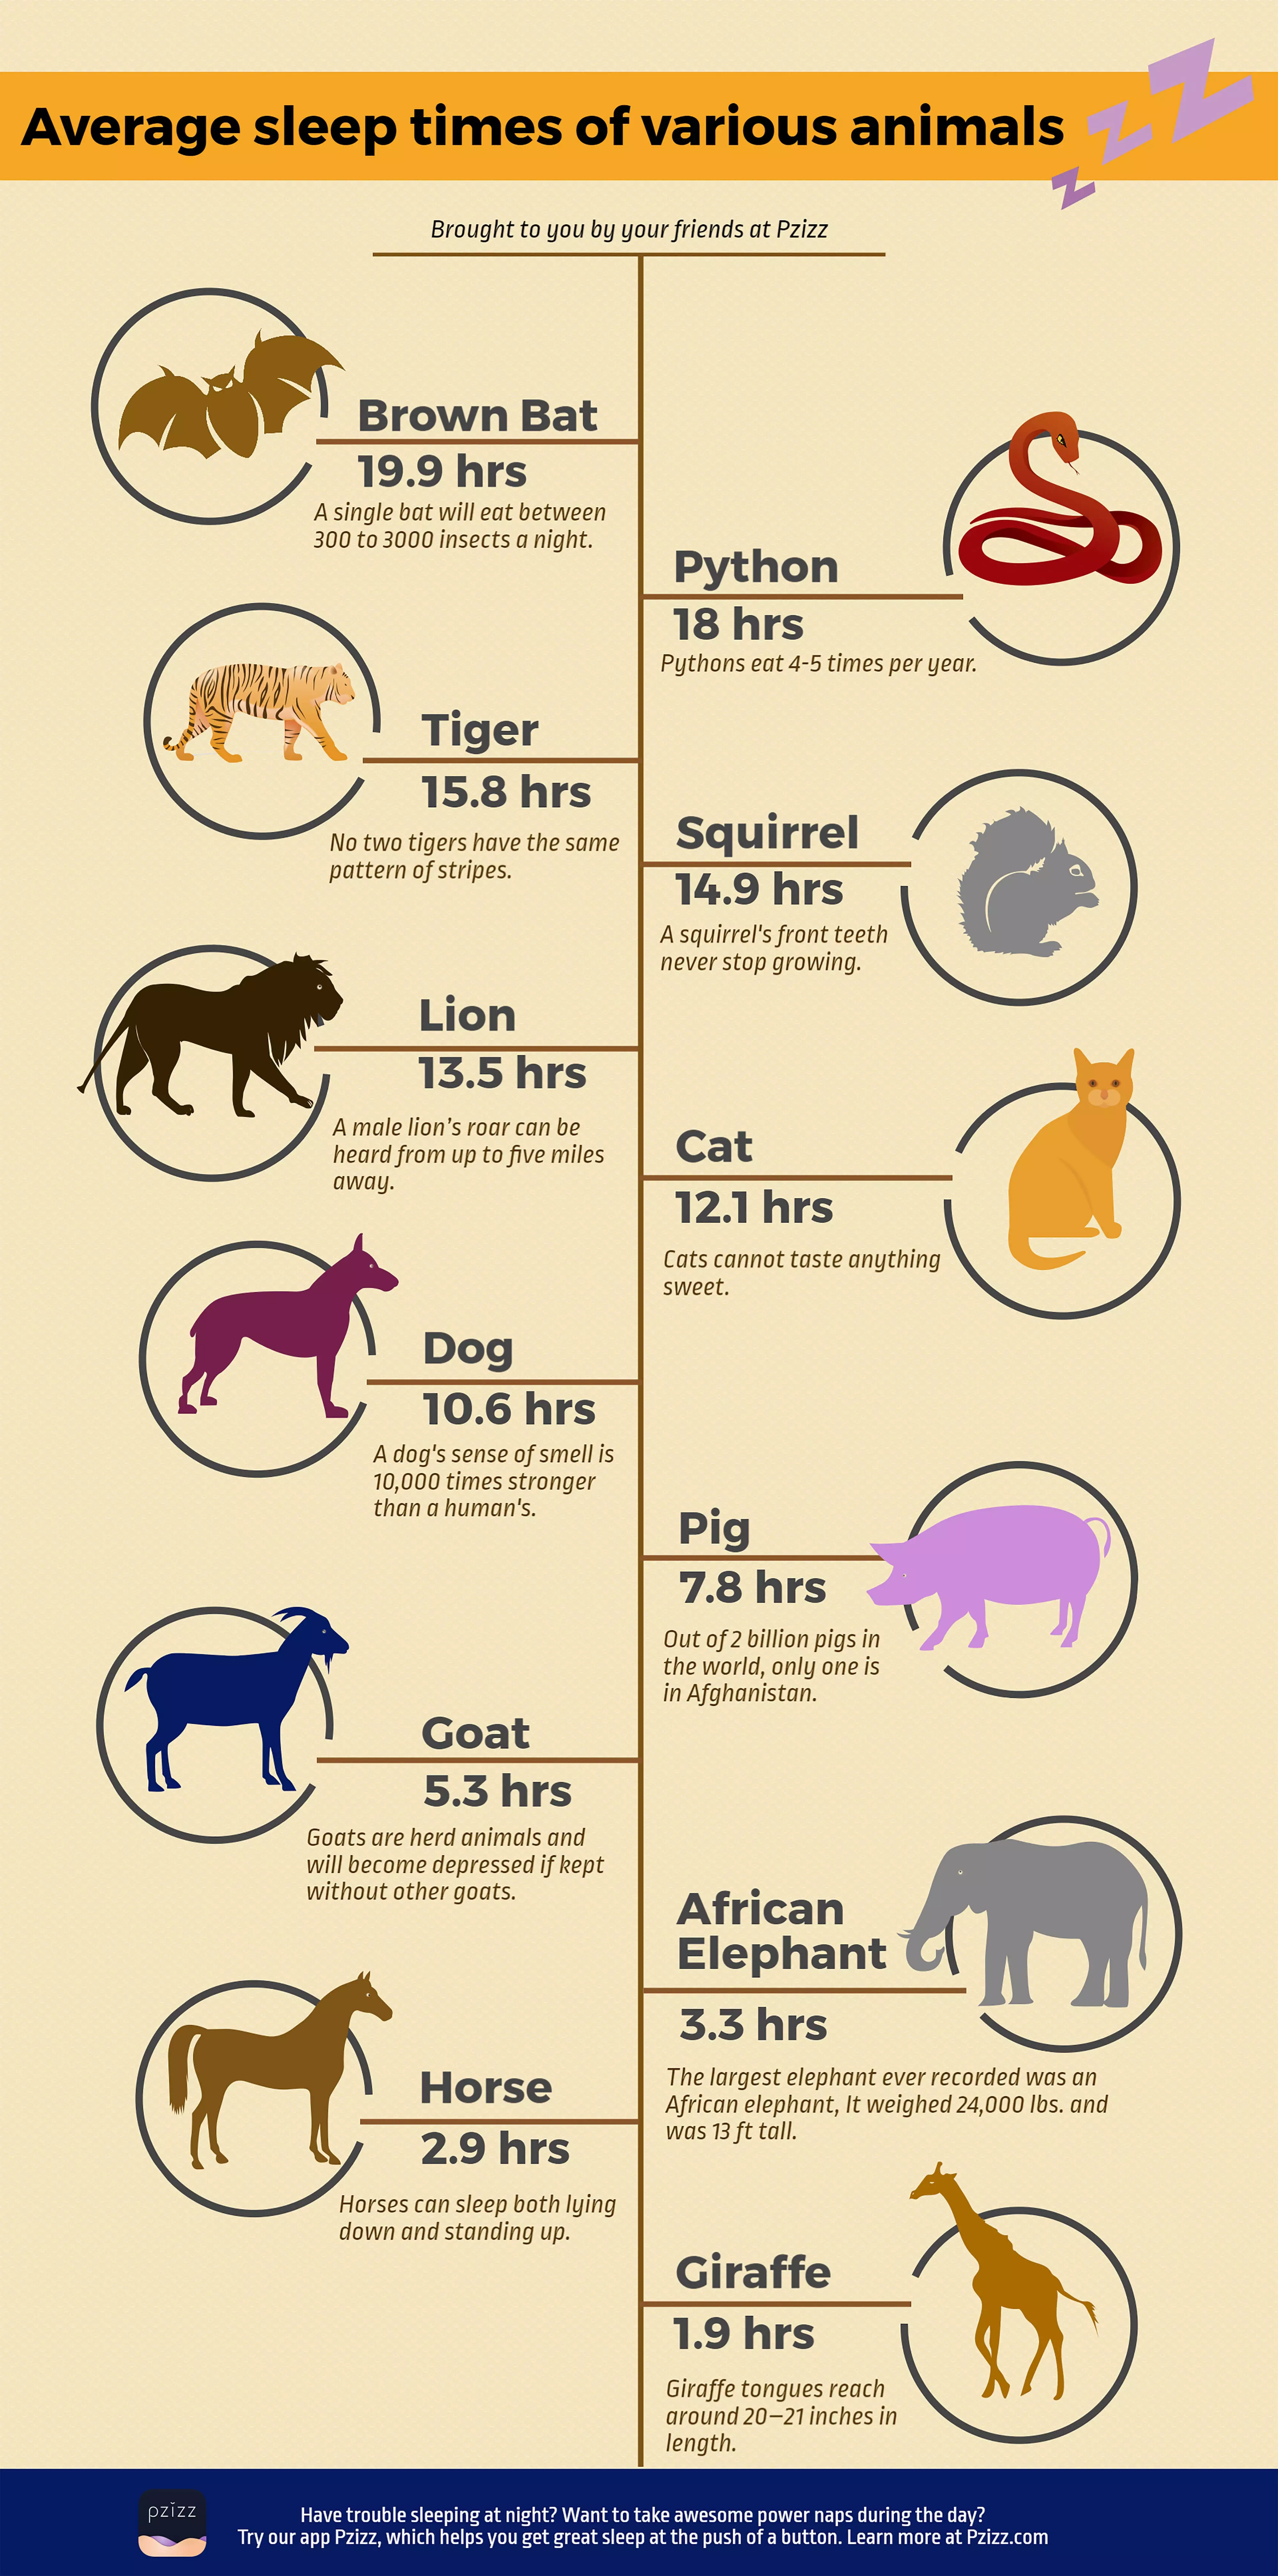 How many hours a day do most animals sleep?